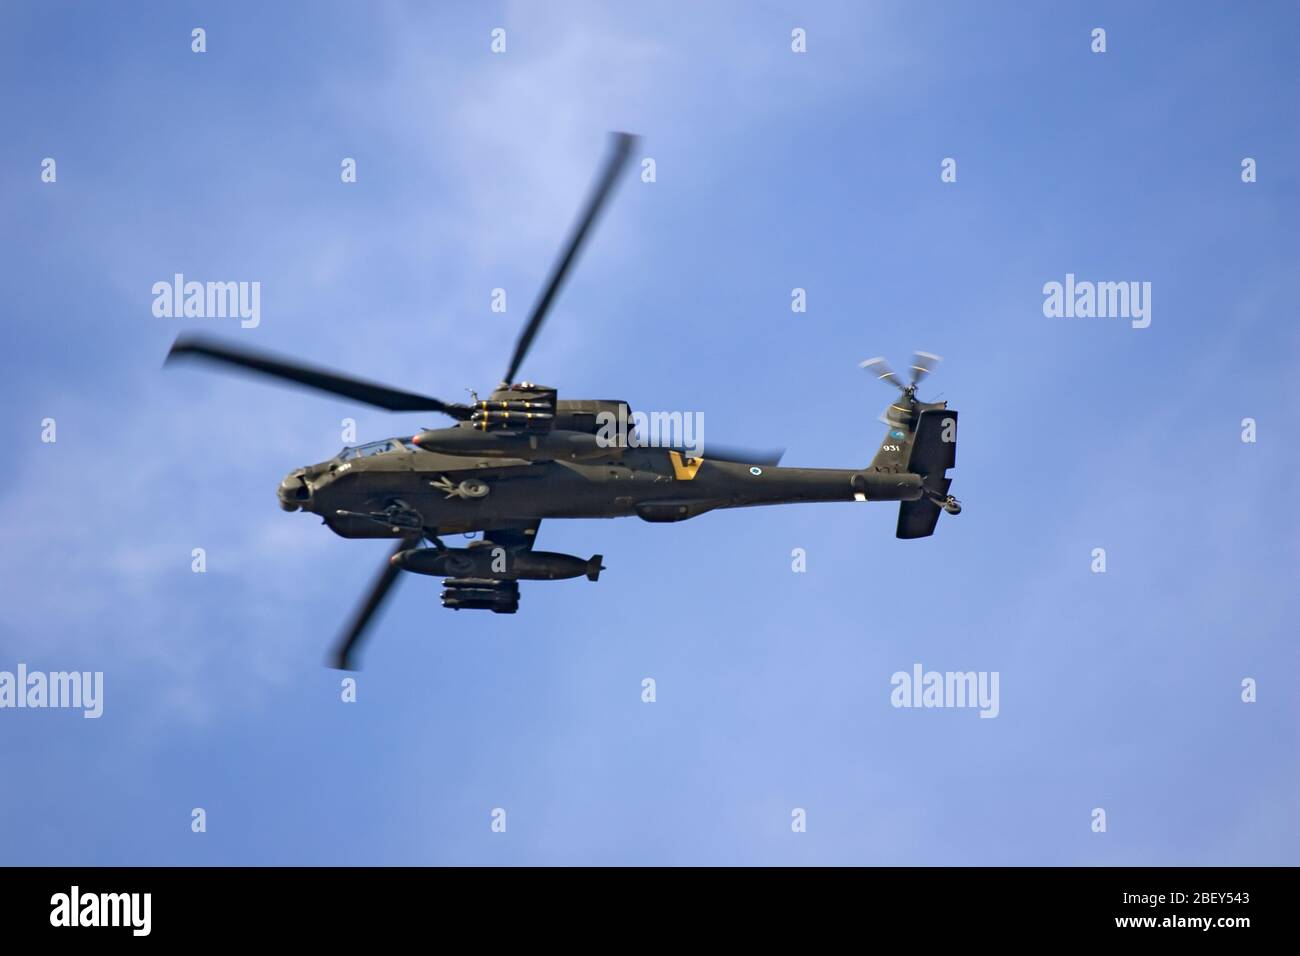 Israeli Air force (IAF) helicopter, Bell AH-1 Cobra in flight Stock Photo